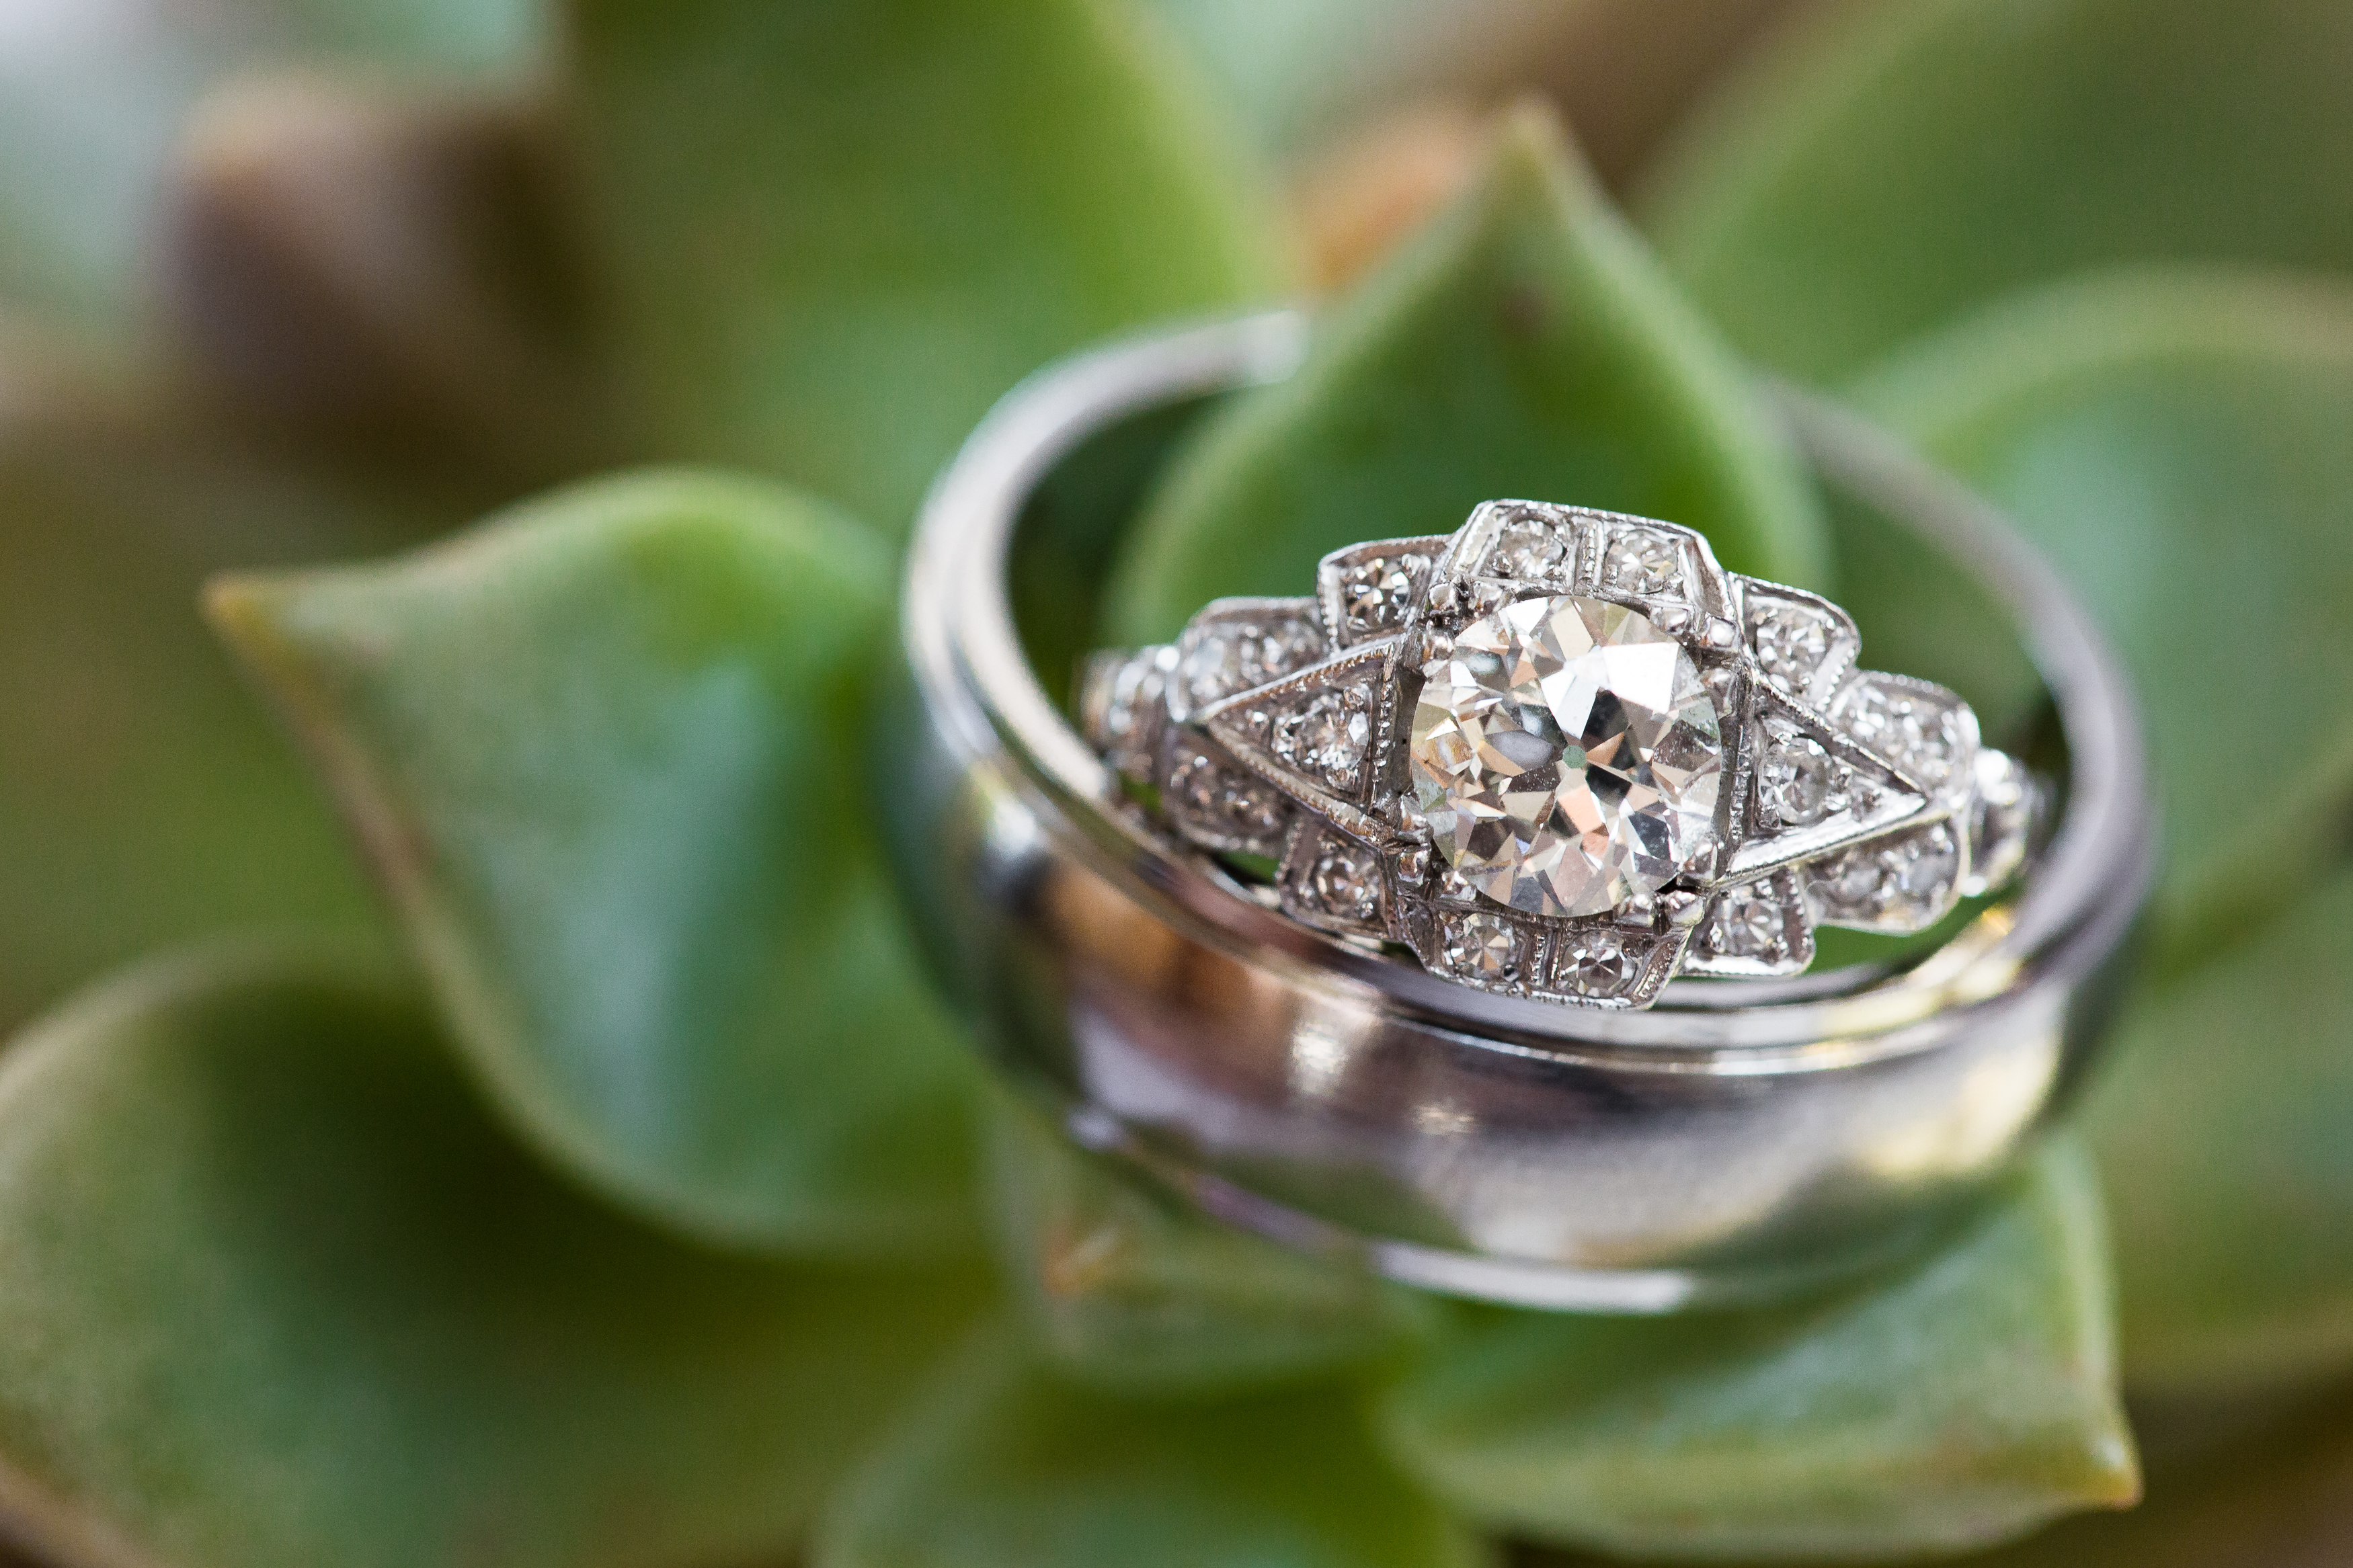 Bride and groom engagement rings on succulent plant